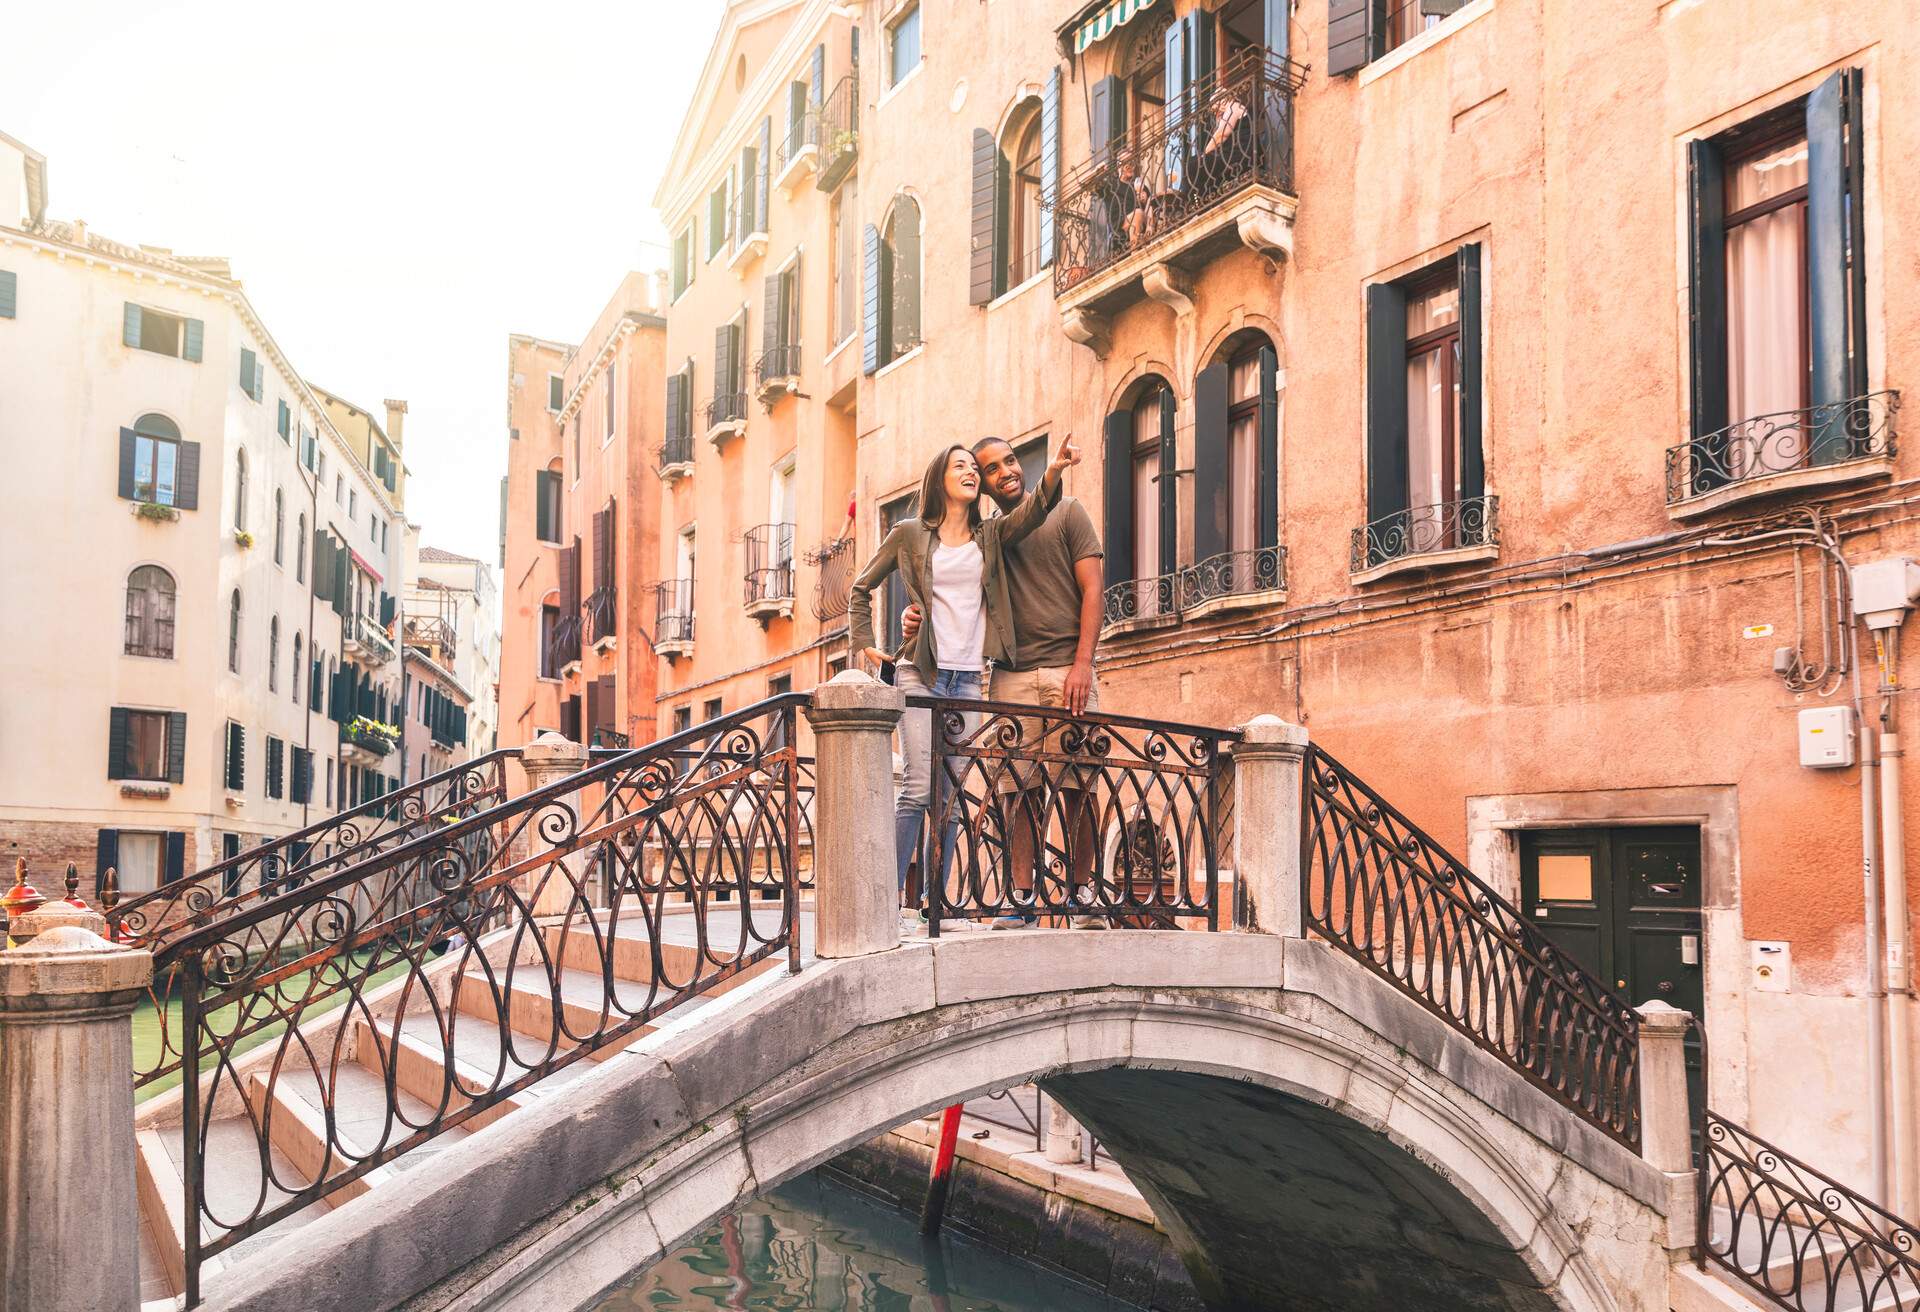 DEST_ITALY_VENICE_THEME_COUPLE_FRIENDS_TRAVEL_VACATION_PERSON-GettyImages-1138705706